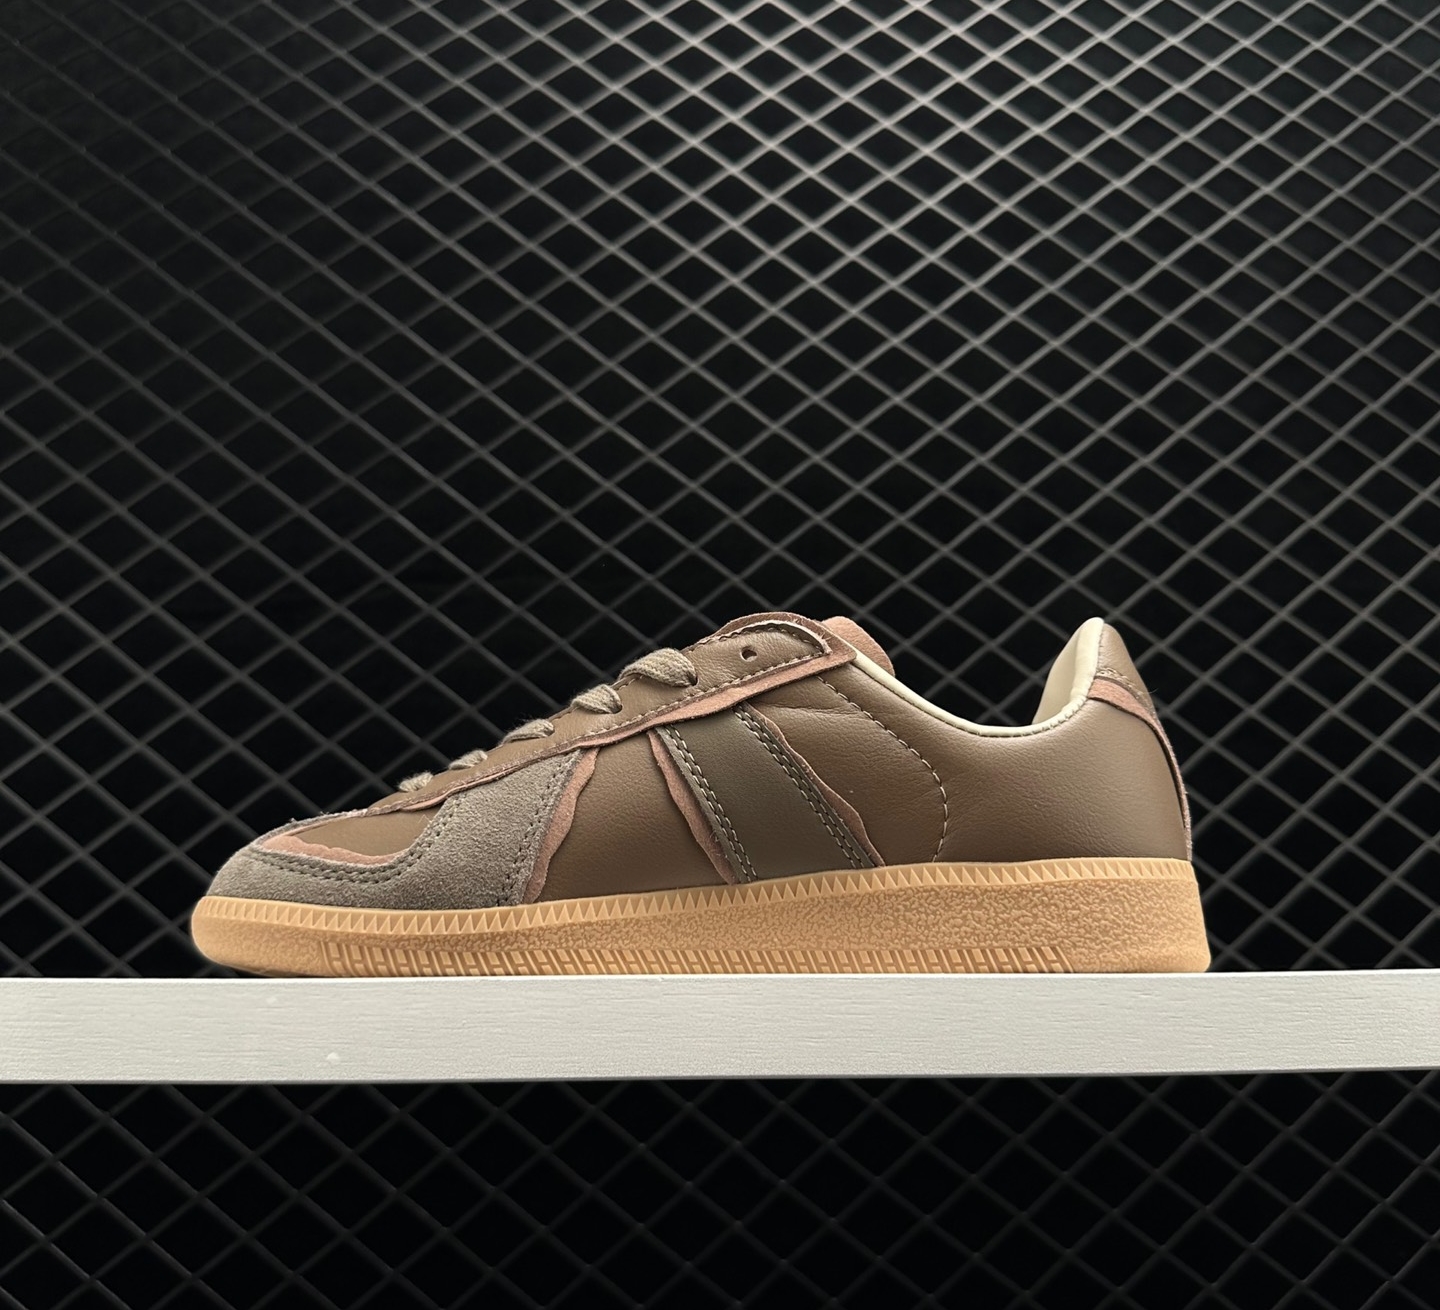 Adidas Originals BW Army Low Brown GY0017 - Classic Design with a Modern Twist